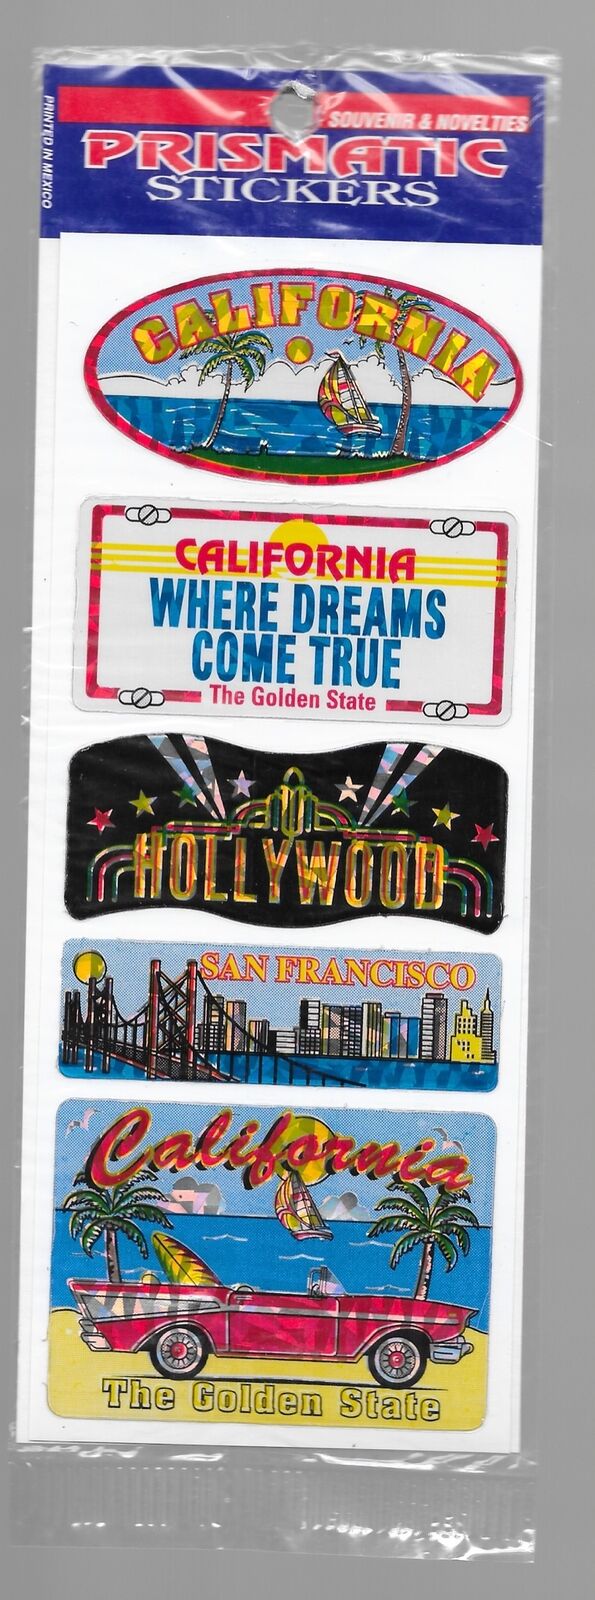 Vintage CALIFORNIA Prismatic Stickers Pack Hollywood San Francisco Golden State